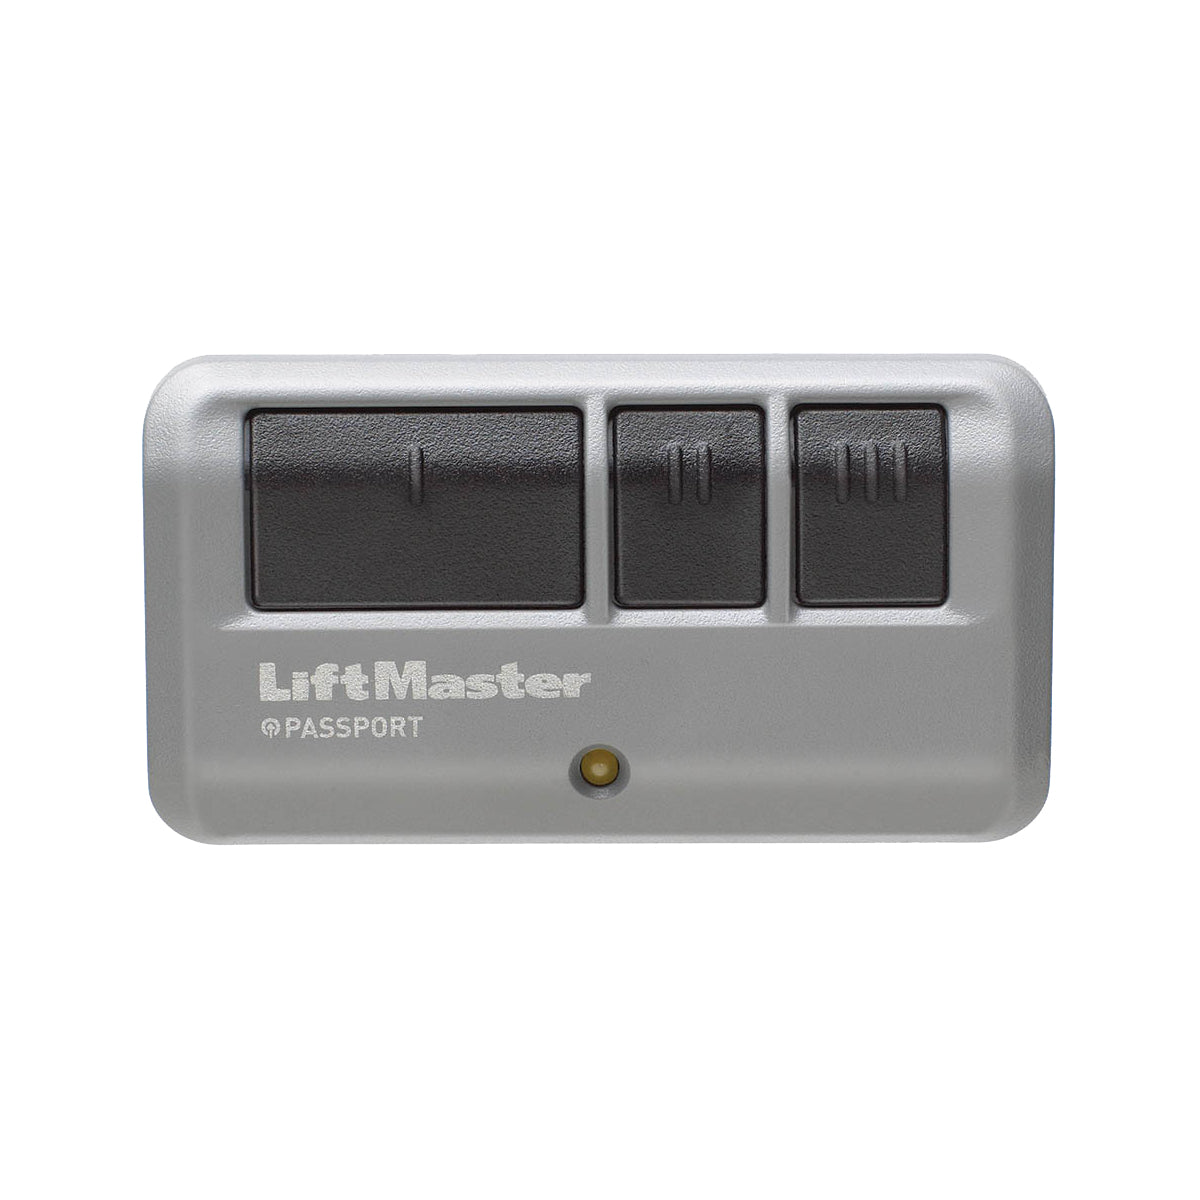 Liftmaster PPV3M Passport Button Remote Control 2.0 – PSS Store